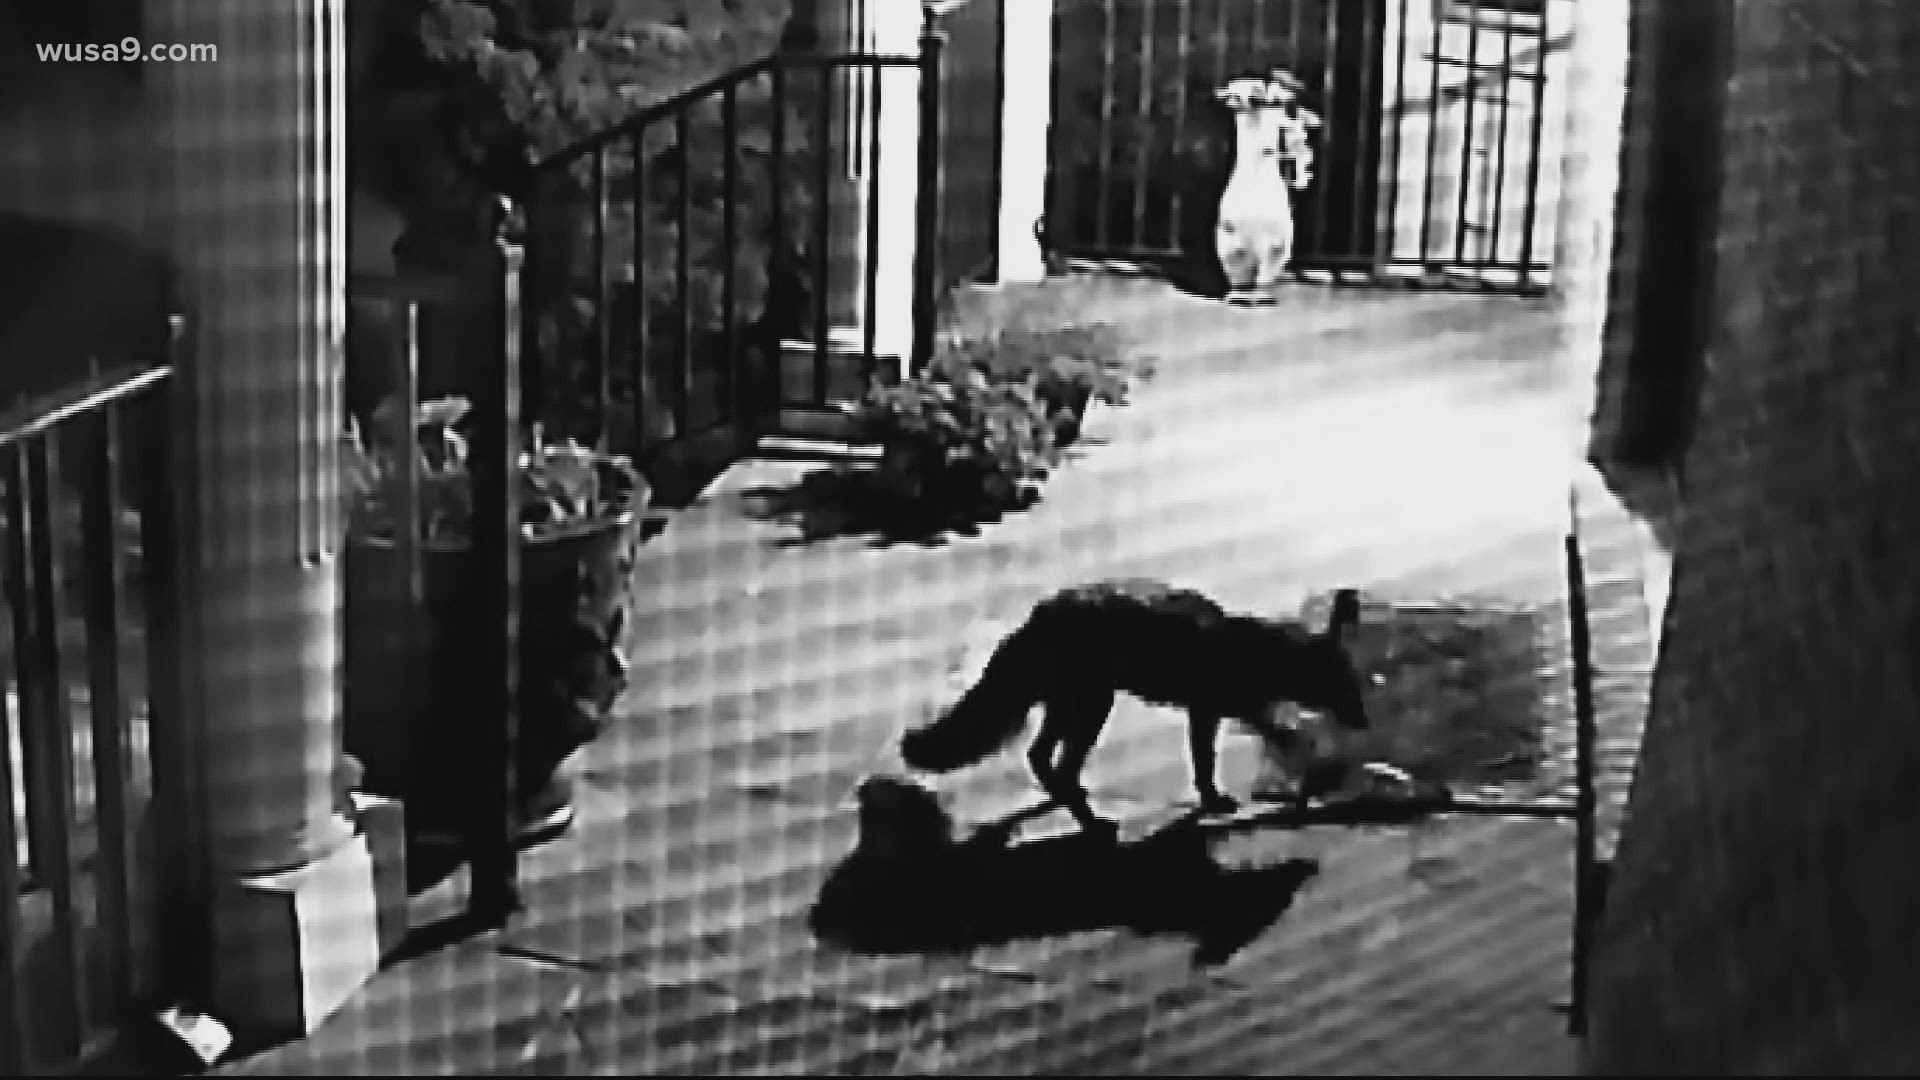 Furbearers with a foot fetish have been caught on security cameras throughout the region as the culprits behind a string of shoe thefts.